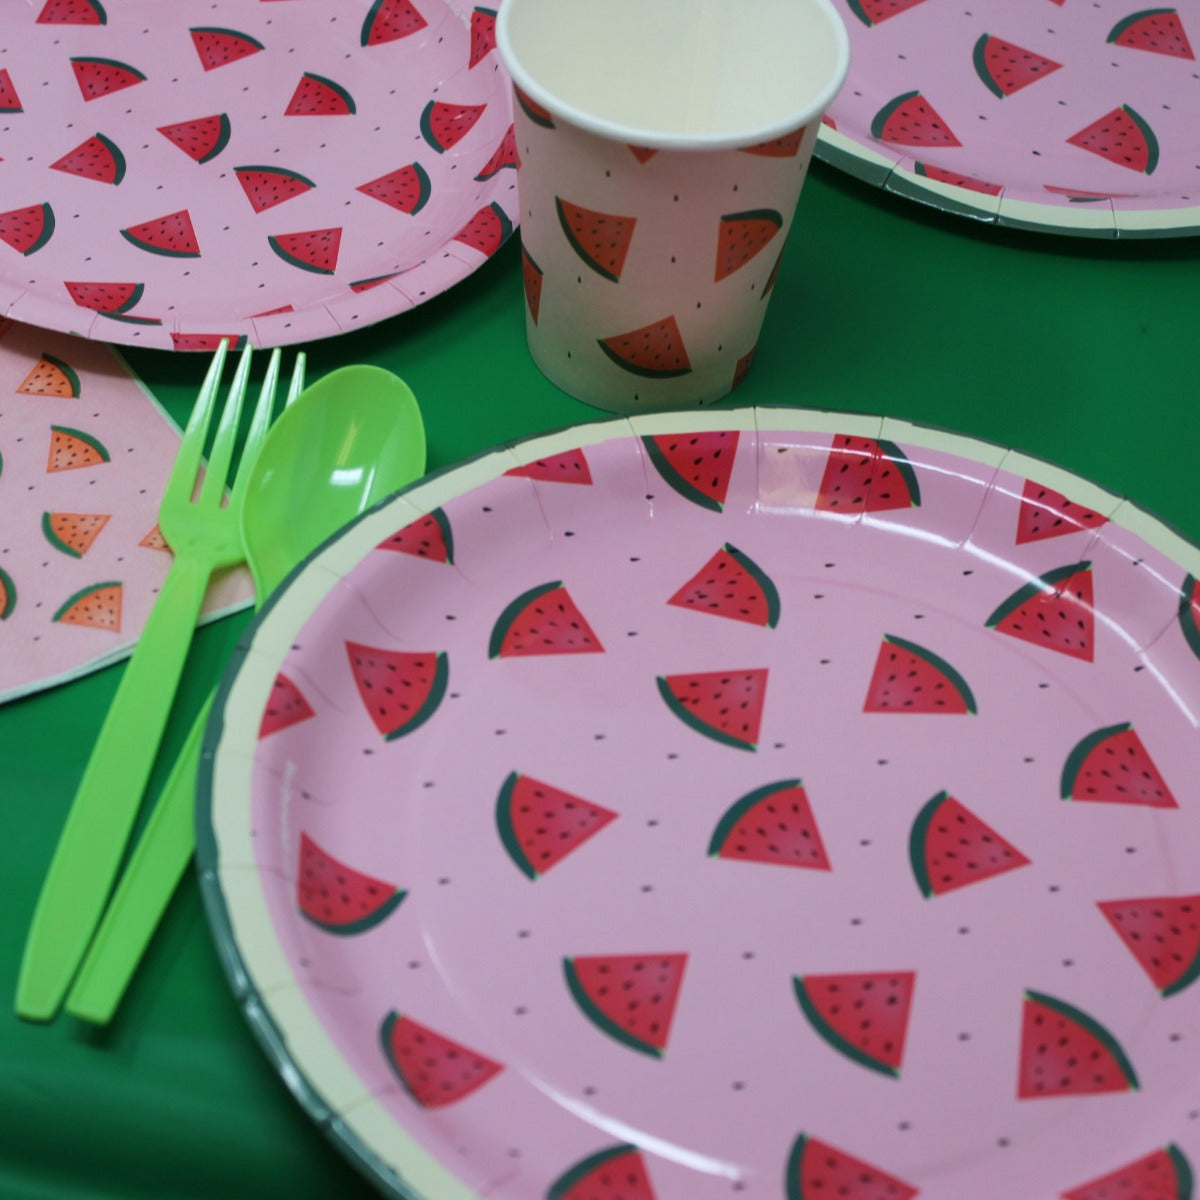  watermelon party supplies packs